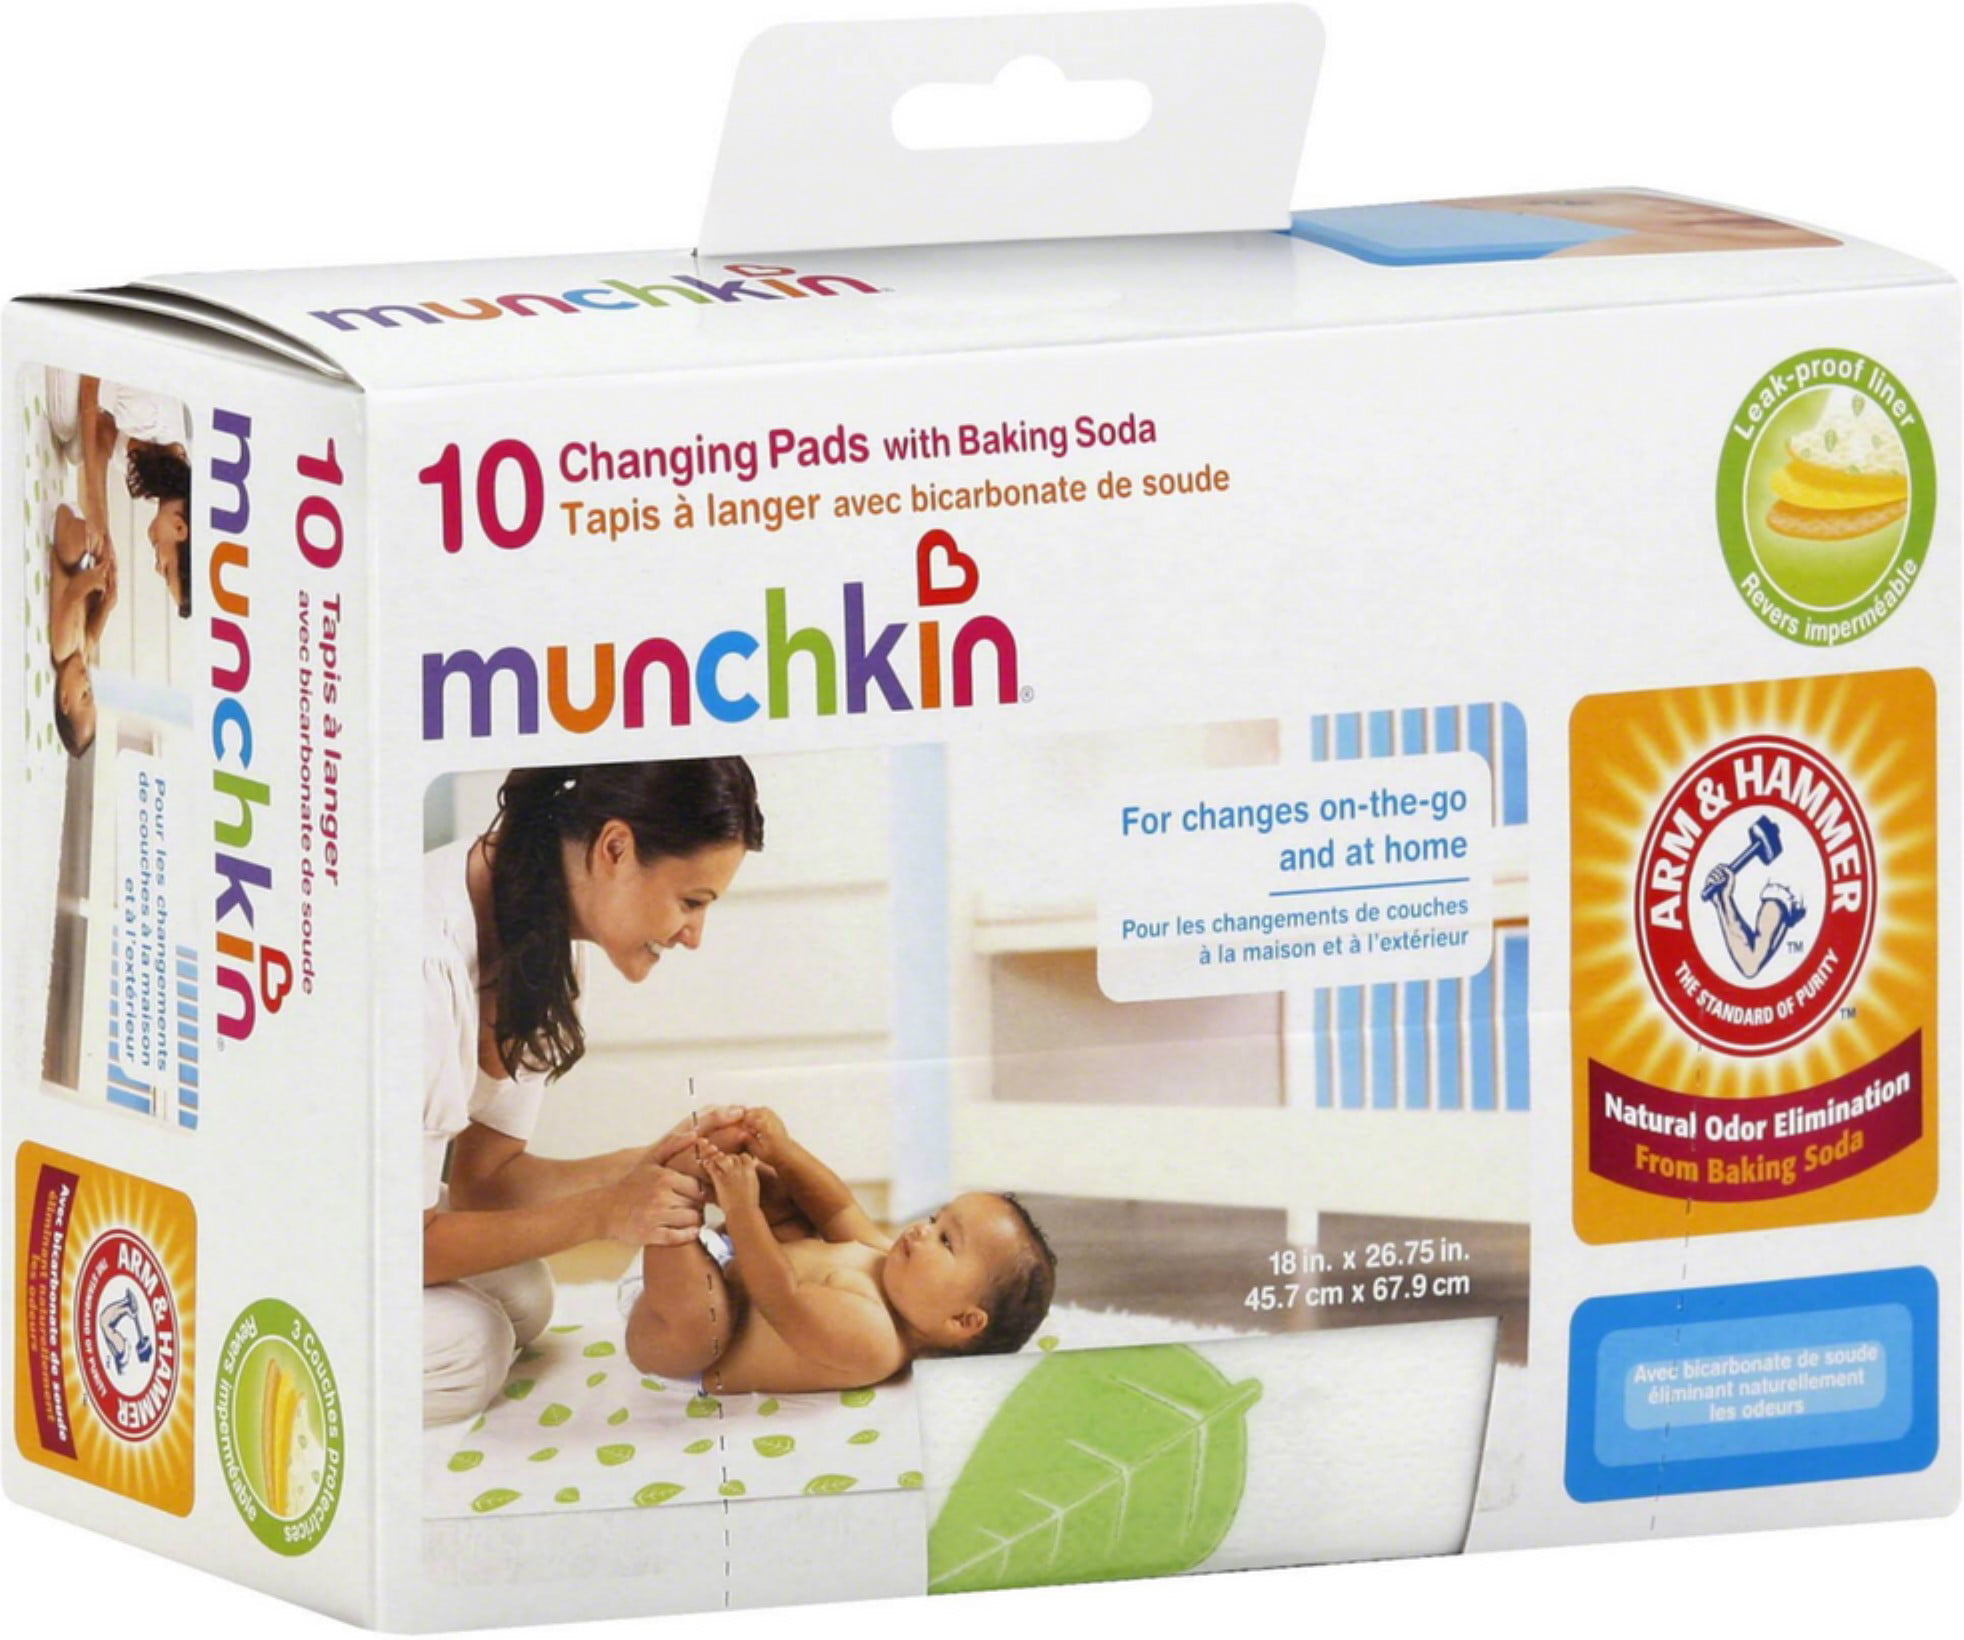 Munchkin Arm & Hammer Disposable Changing Pad with Baking Soda 10